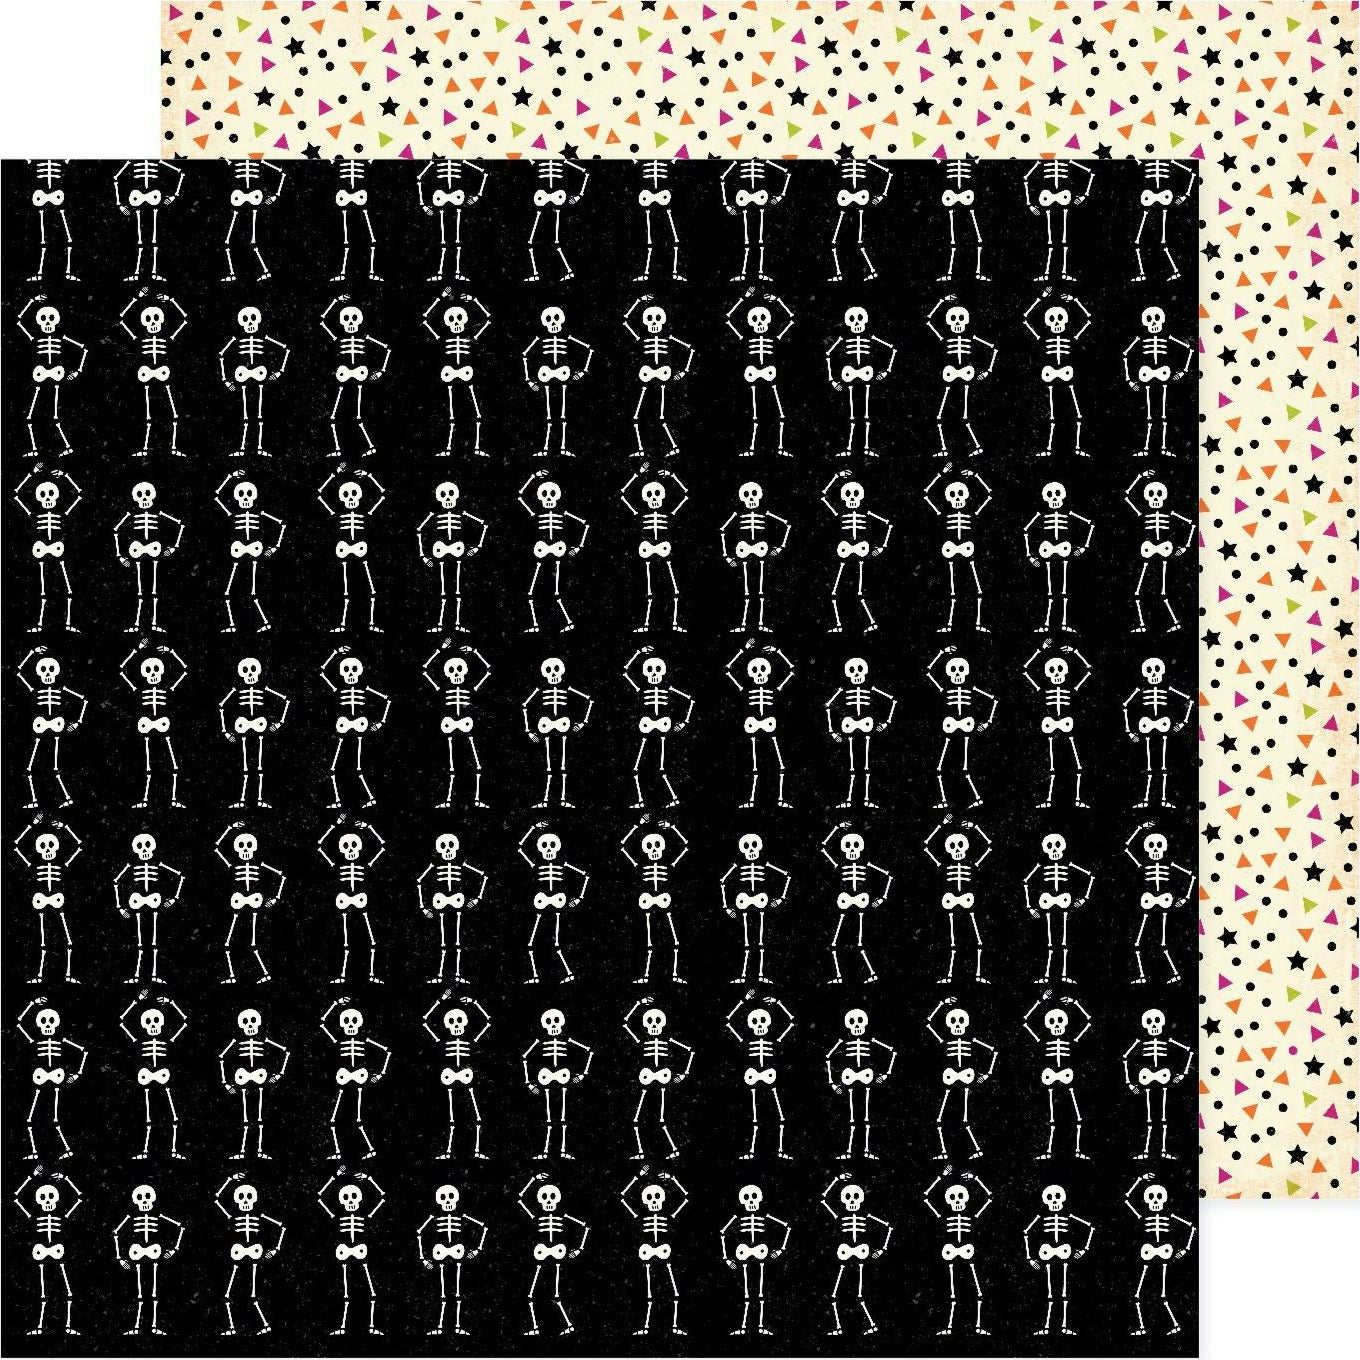 (dancing white skeletons on a black background - little Halloween-colored triangles and little black stars on a cream background reverse) - on double-sided 12x12 cardstock. From American Crafts.